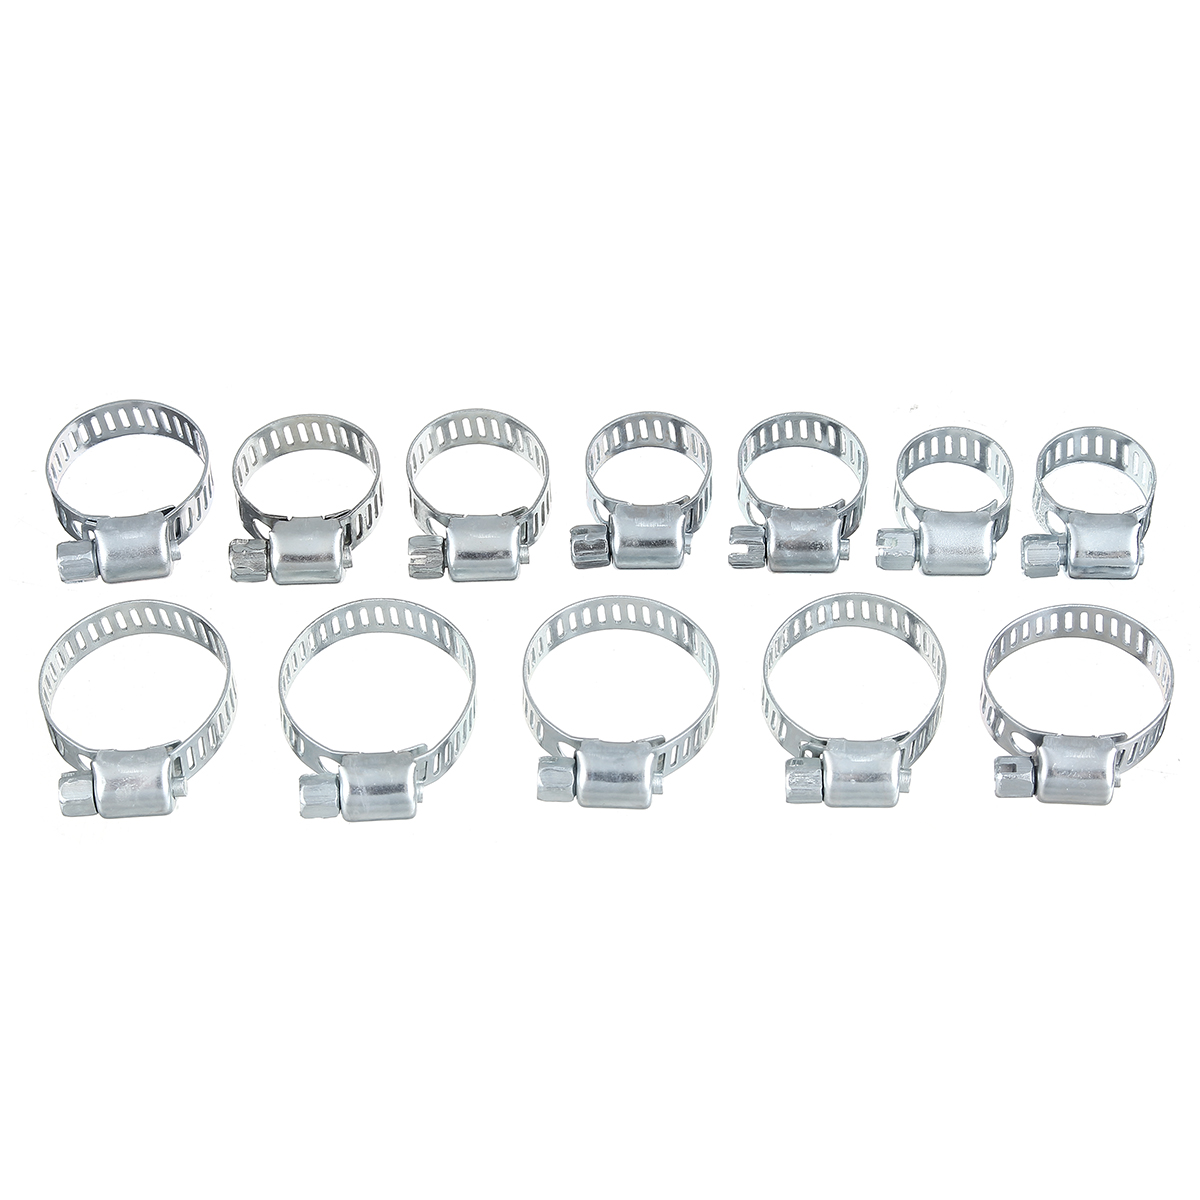 12Pcs-Stainless-Steel-Clip-Fuel-Gas-Water-Hose-Clamp-Worm-Drive-Pipe-Tube-Clips-1629542-2